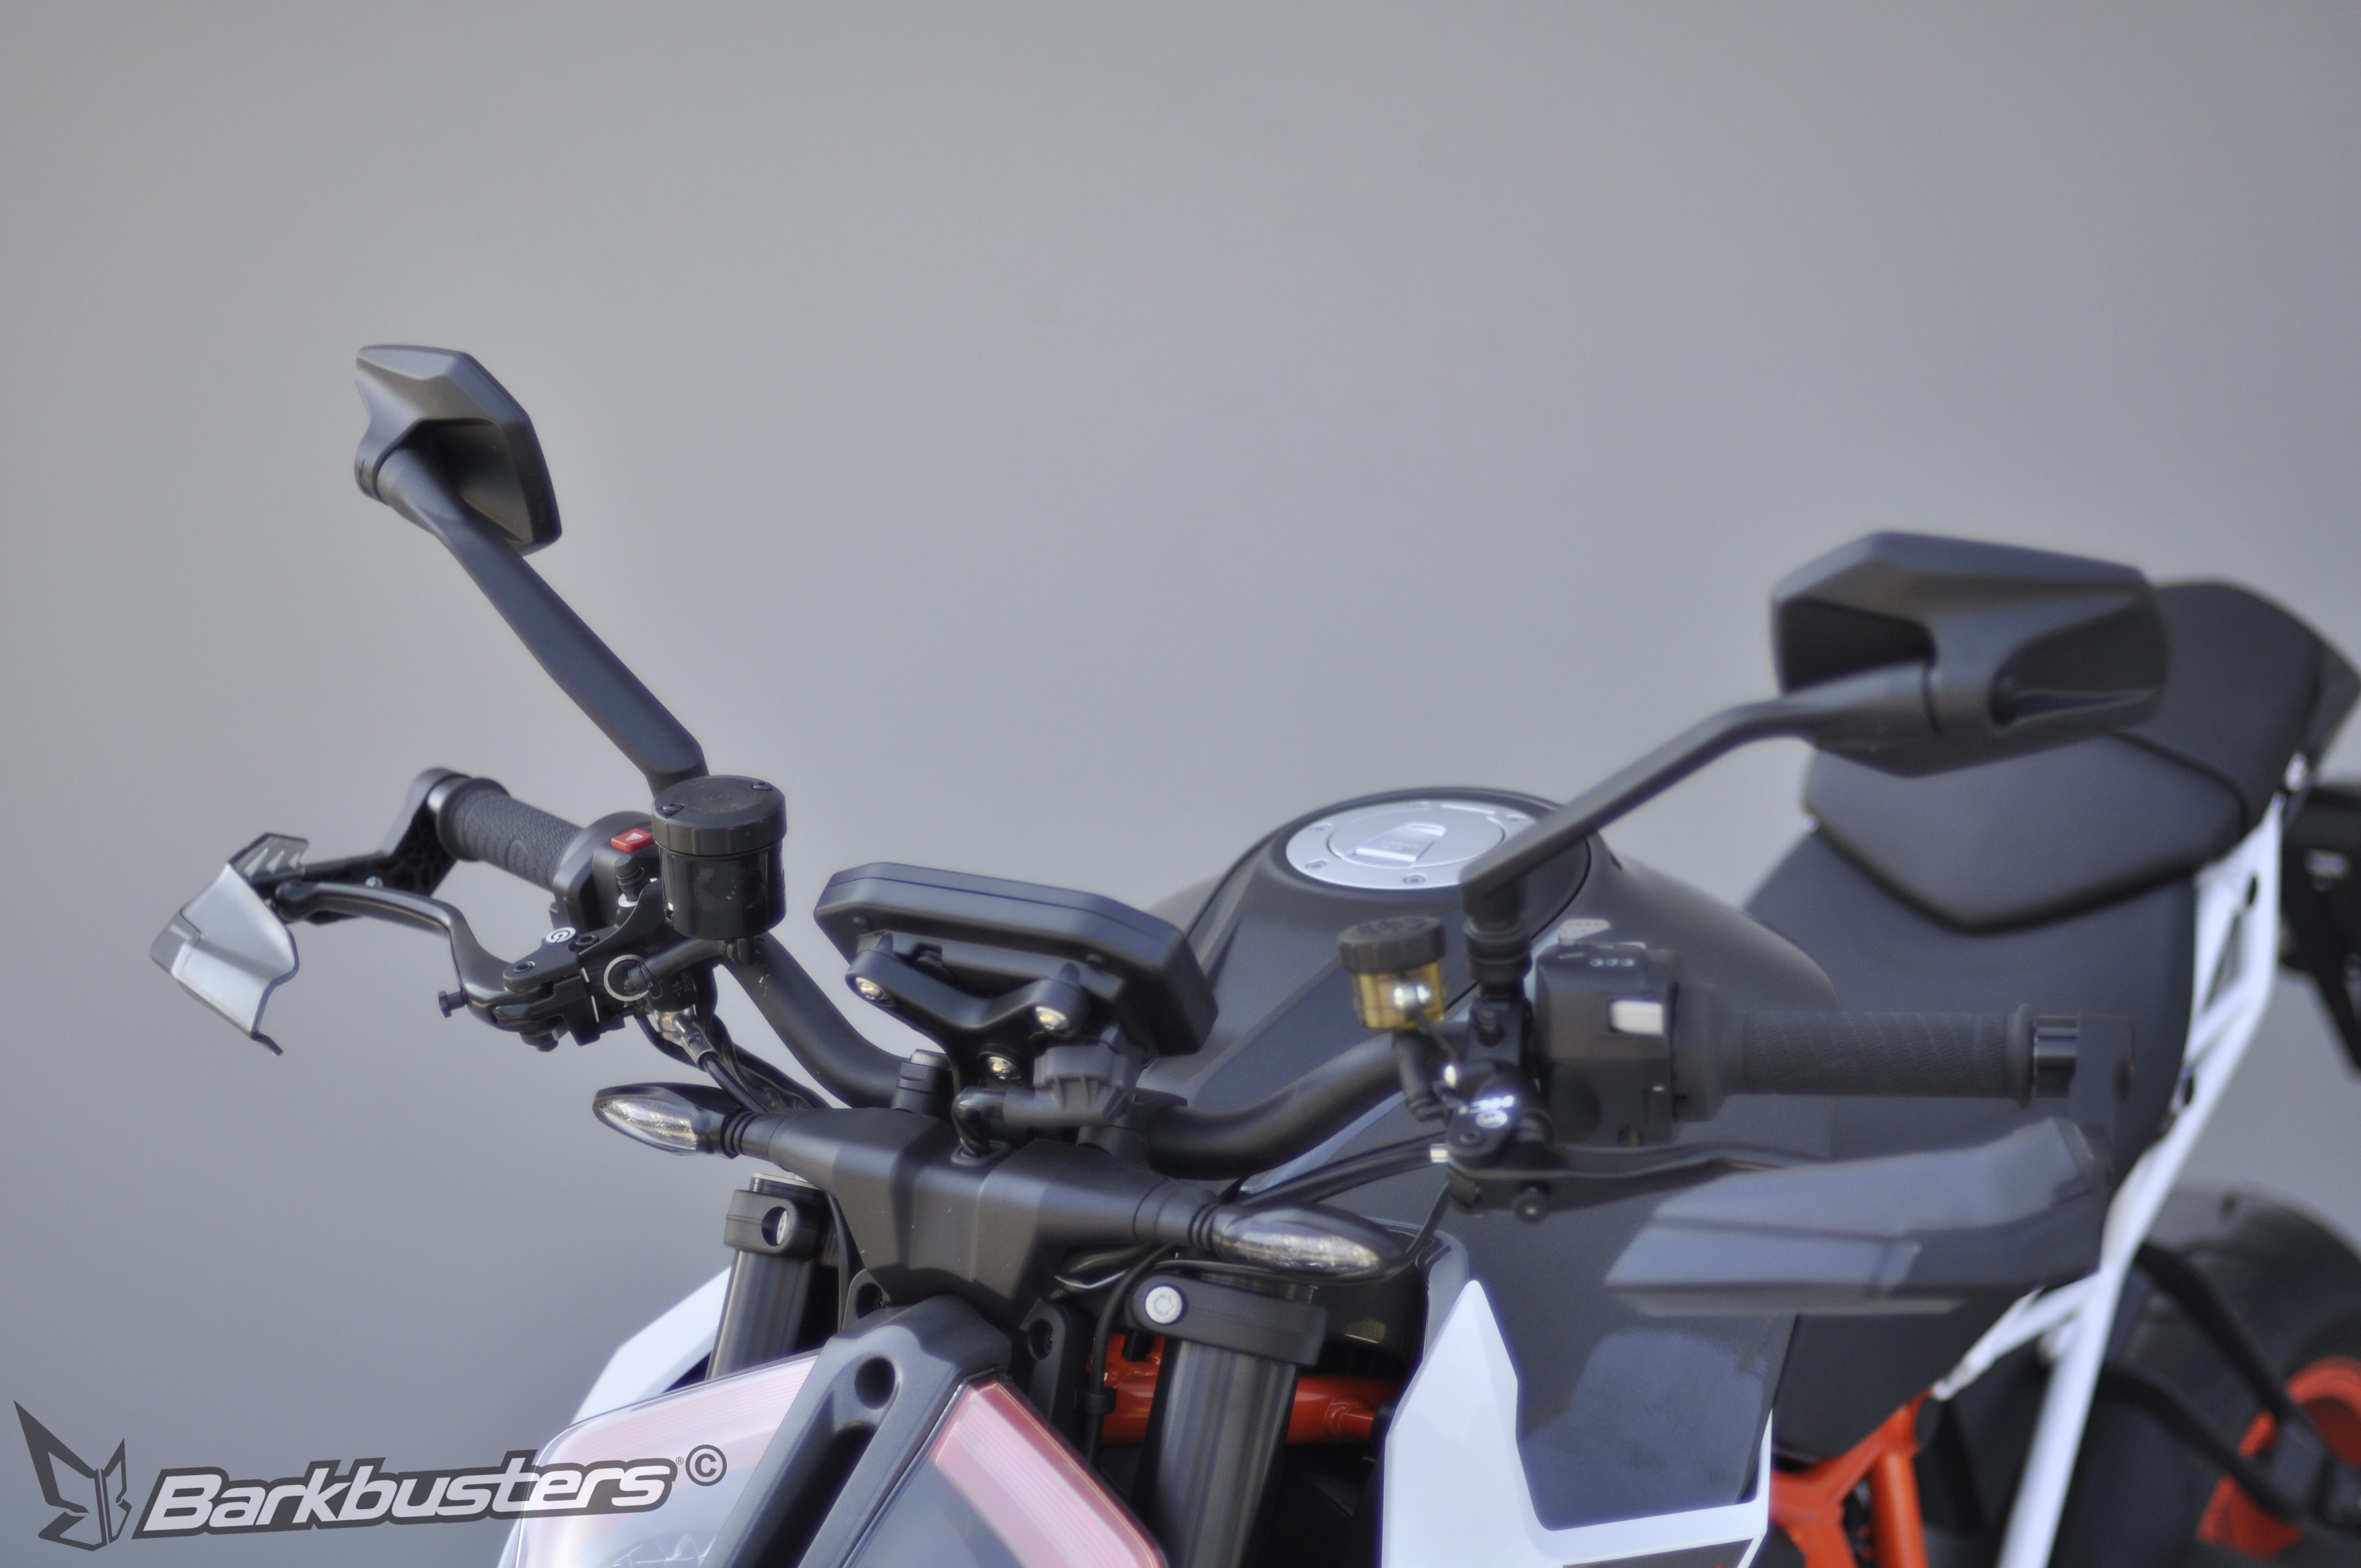 BARKBUSTERS AERO-GP Lever Protector (Code: AGP-001) fitted to KTM 1290 Super Duke R